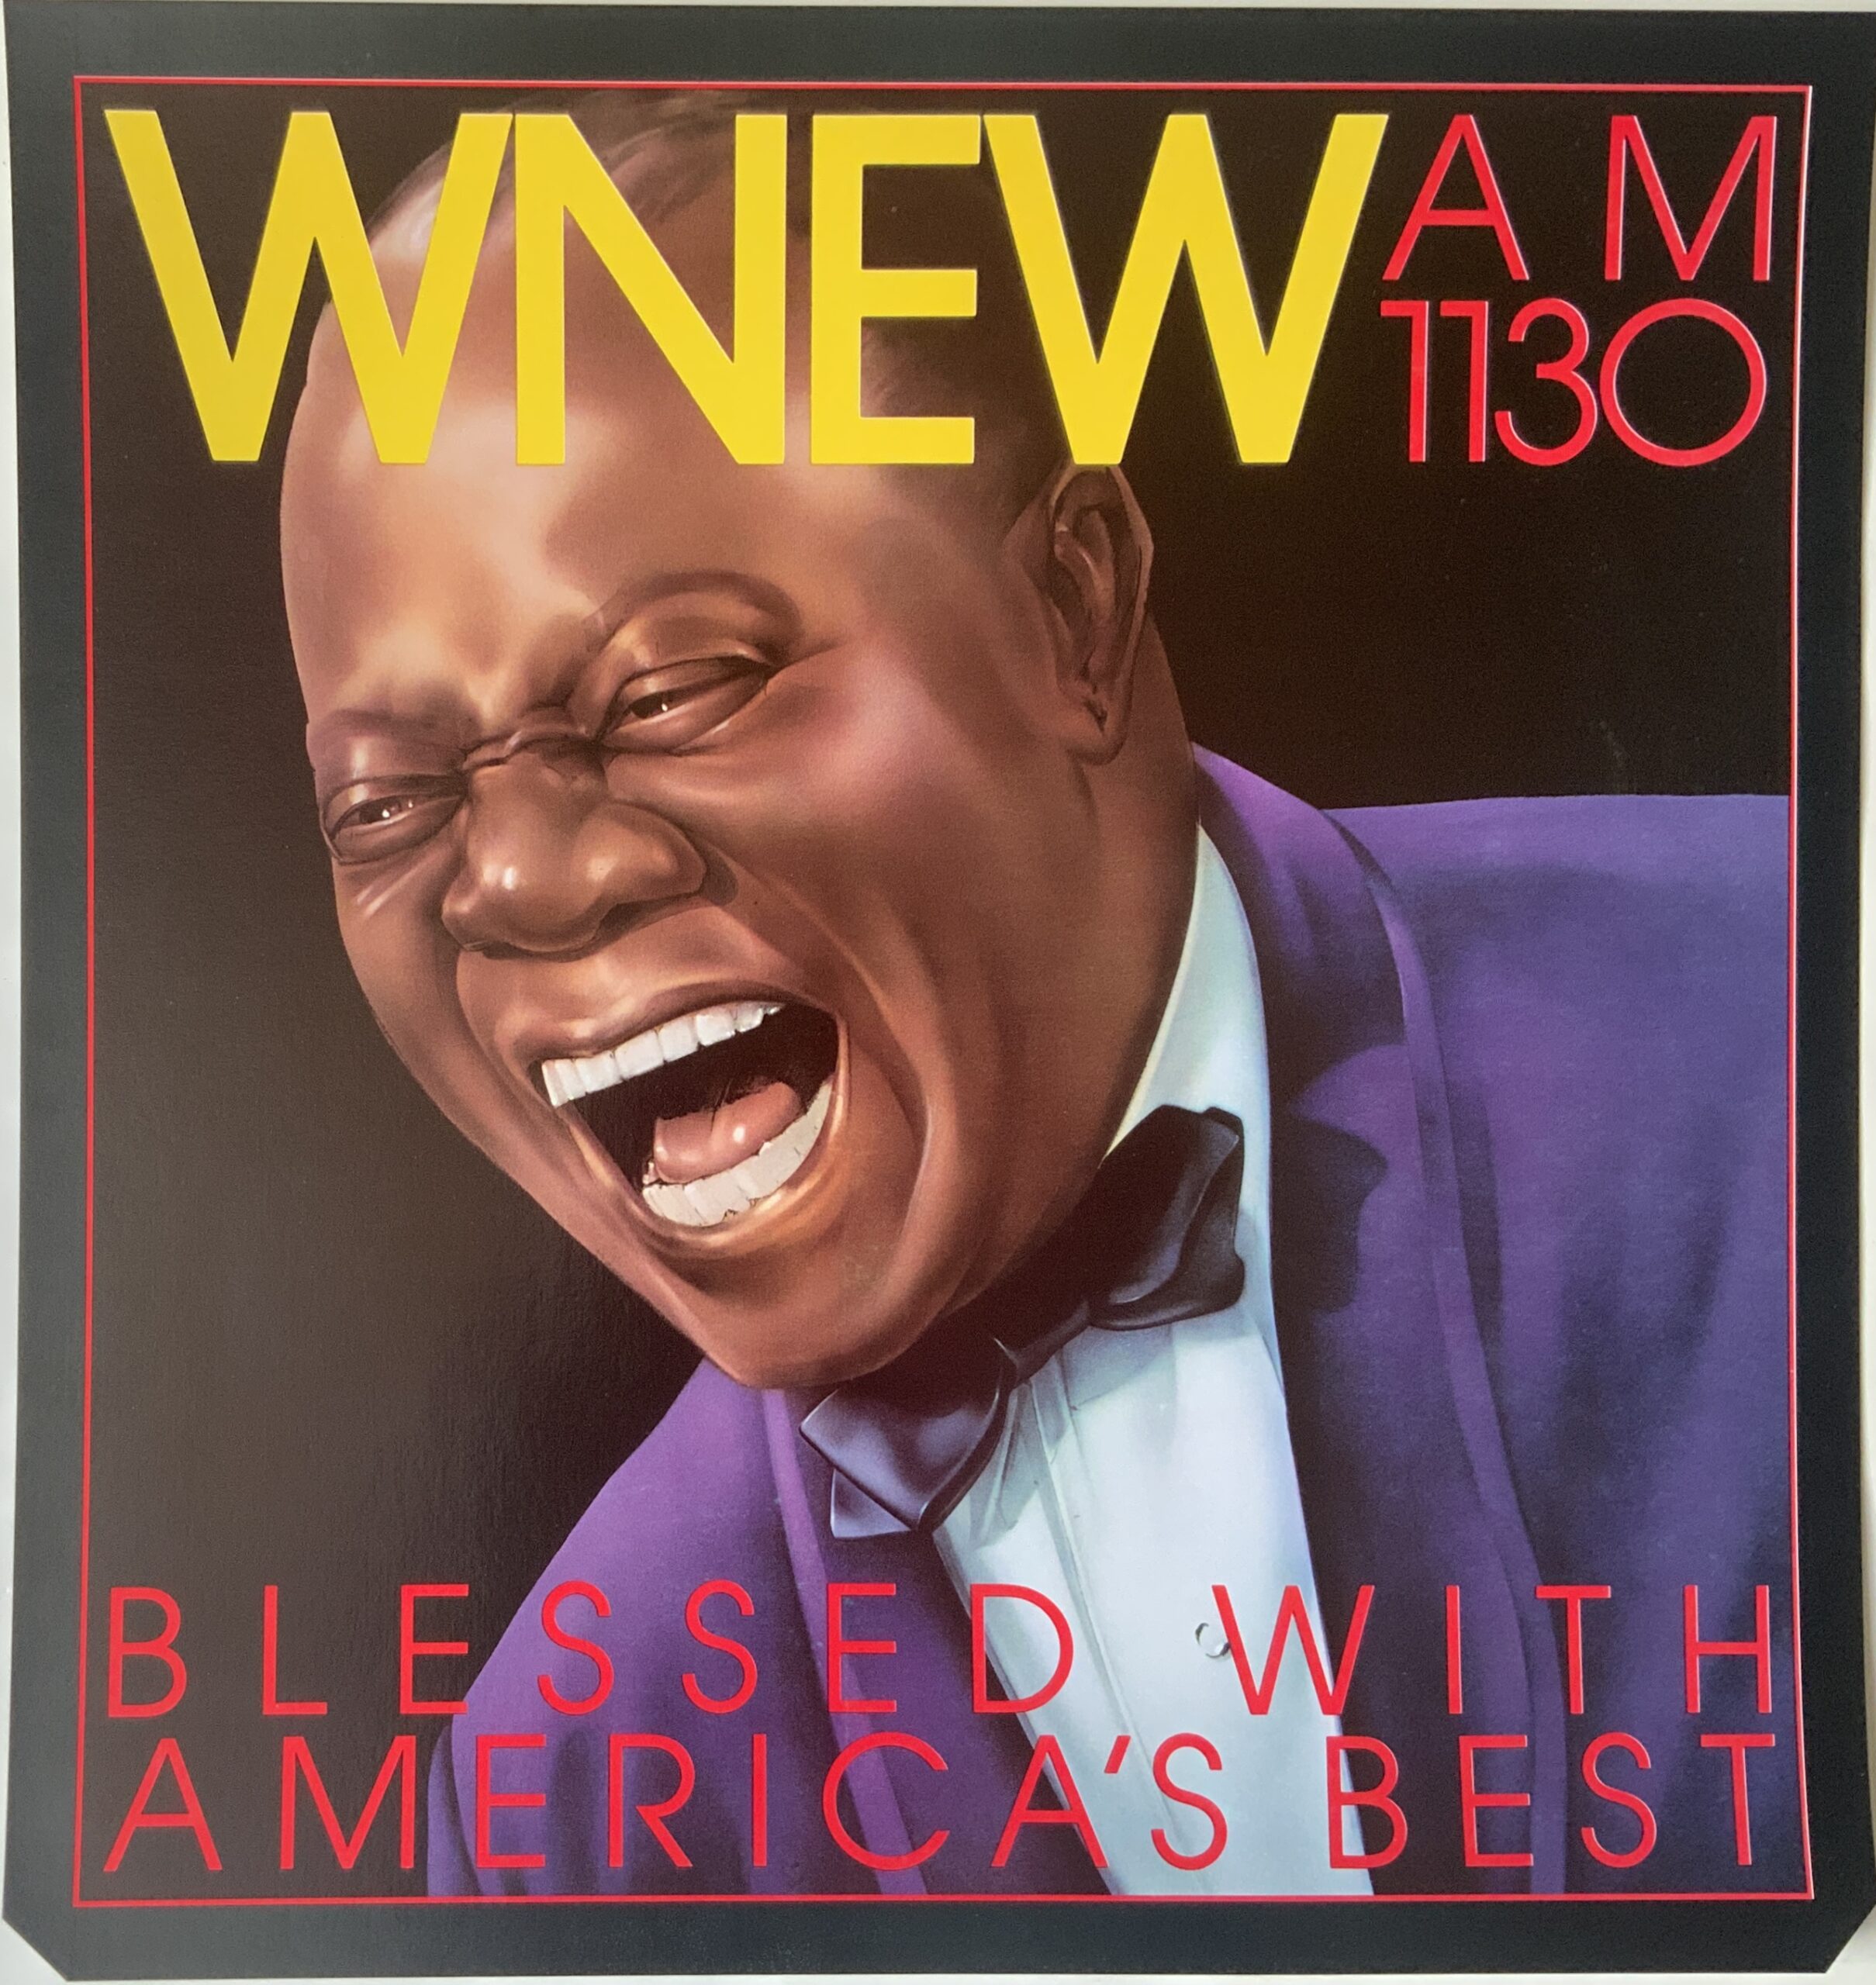 M640	WNEW AM 1130: BLESSED WITH AMERICA’S BEST - LOUIS ARMSTRONG - SUBWAY POSTER CA. 1985